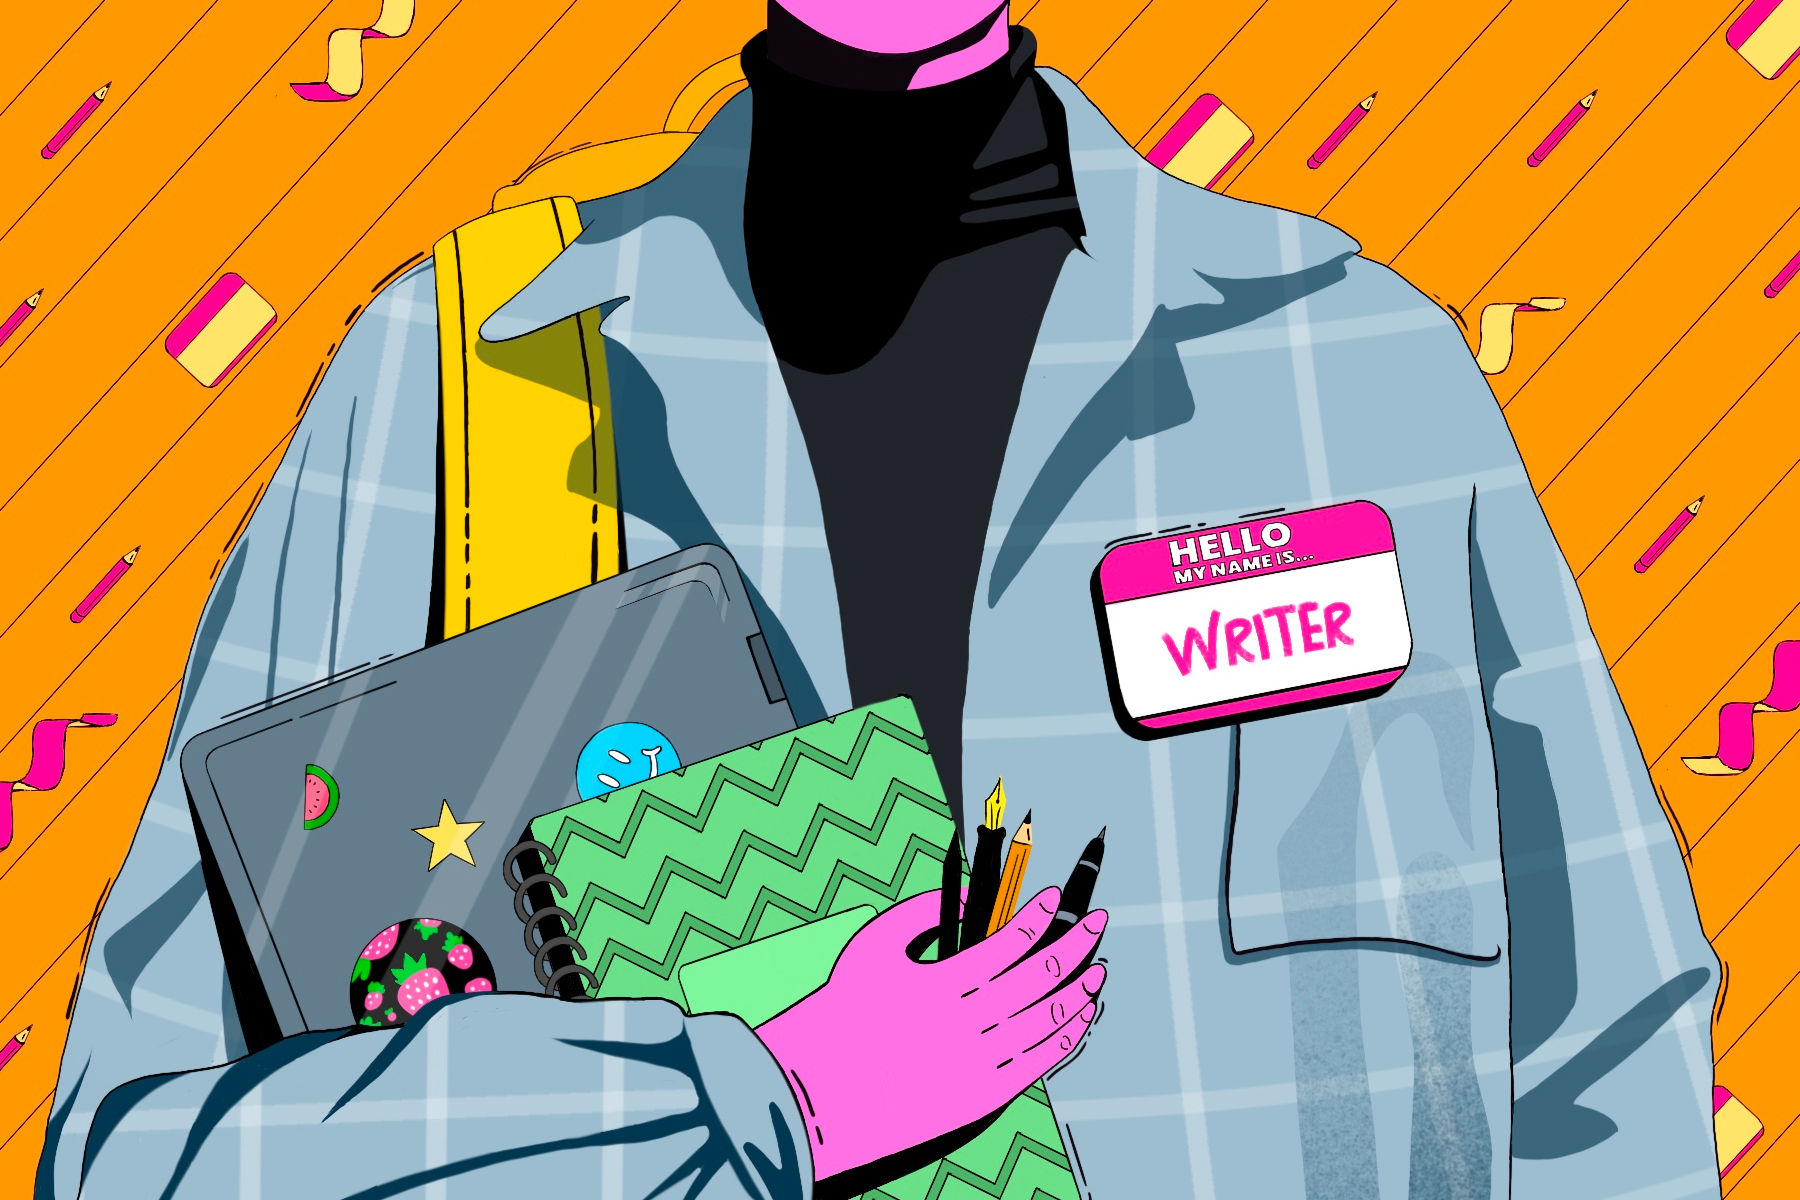 A figure is illustrated holding notebooks and wearing a name tag that reads "Hello, my name is: Writer."